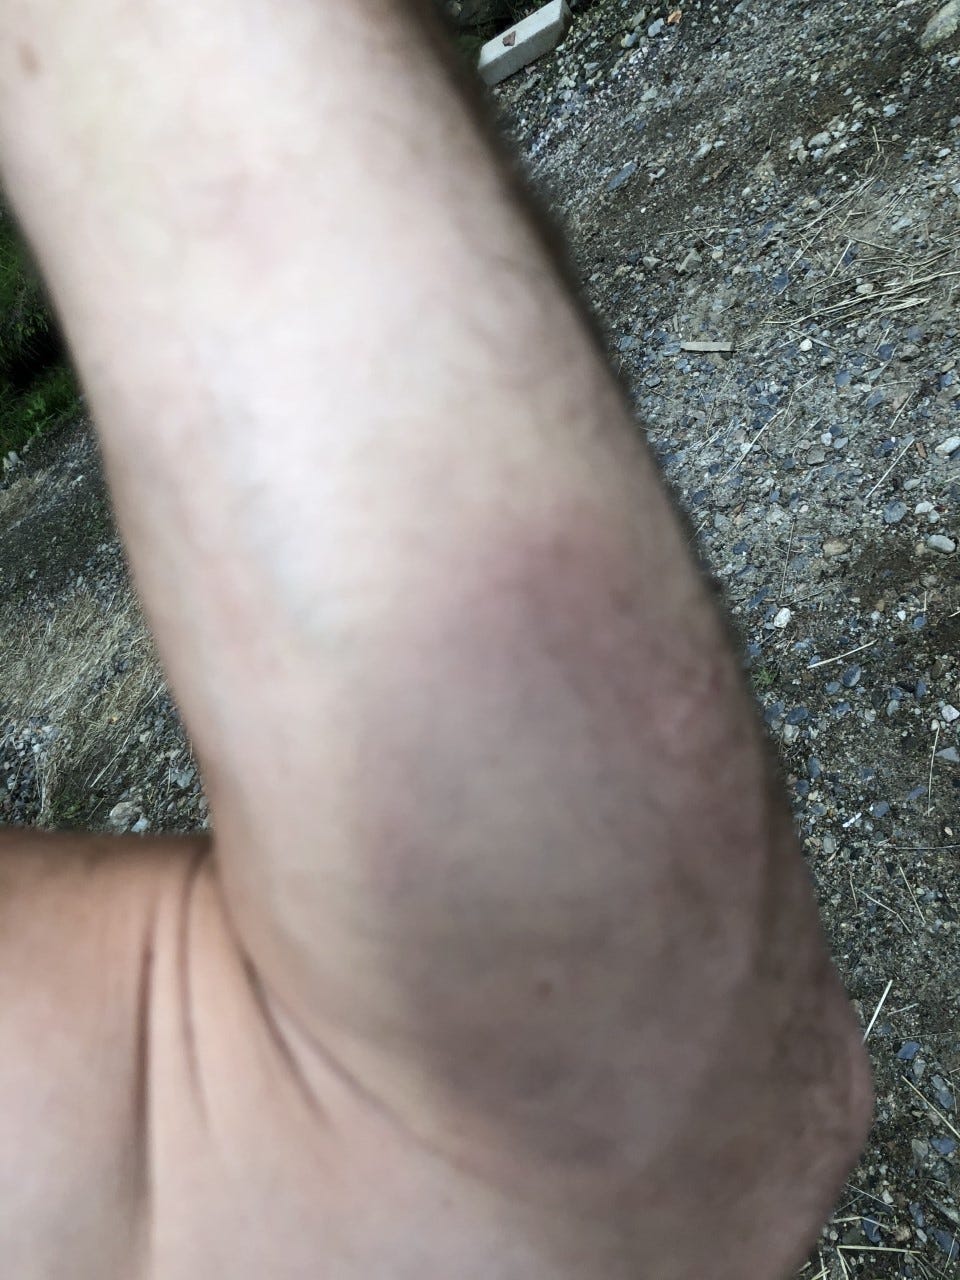 Jesse Telford, an emergency room charge nurse at Beth Israel Deaconess Hospital in Plymouth, Mass., said he and co-workers are verbally or physically assaulted five or six times per shift. He was assaulted in August. Here is one of the injuries he suffered.